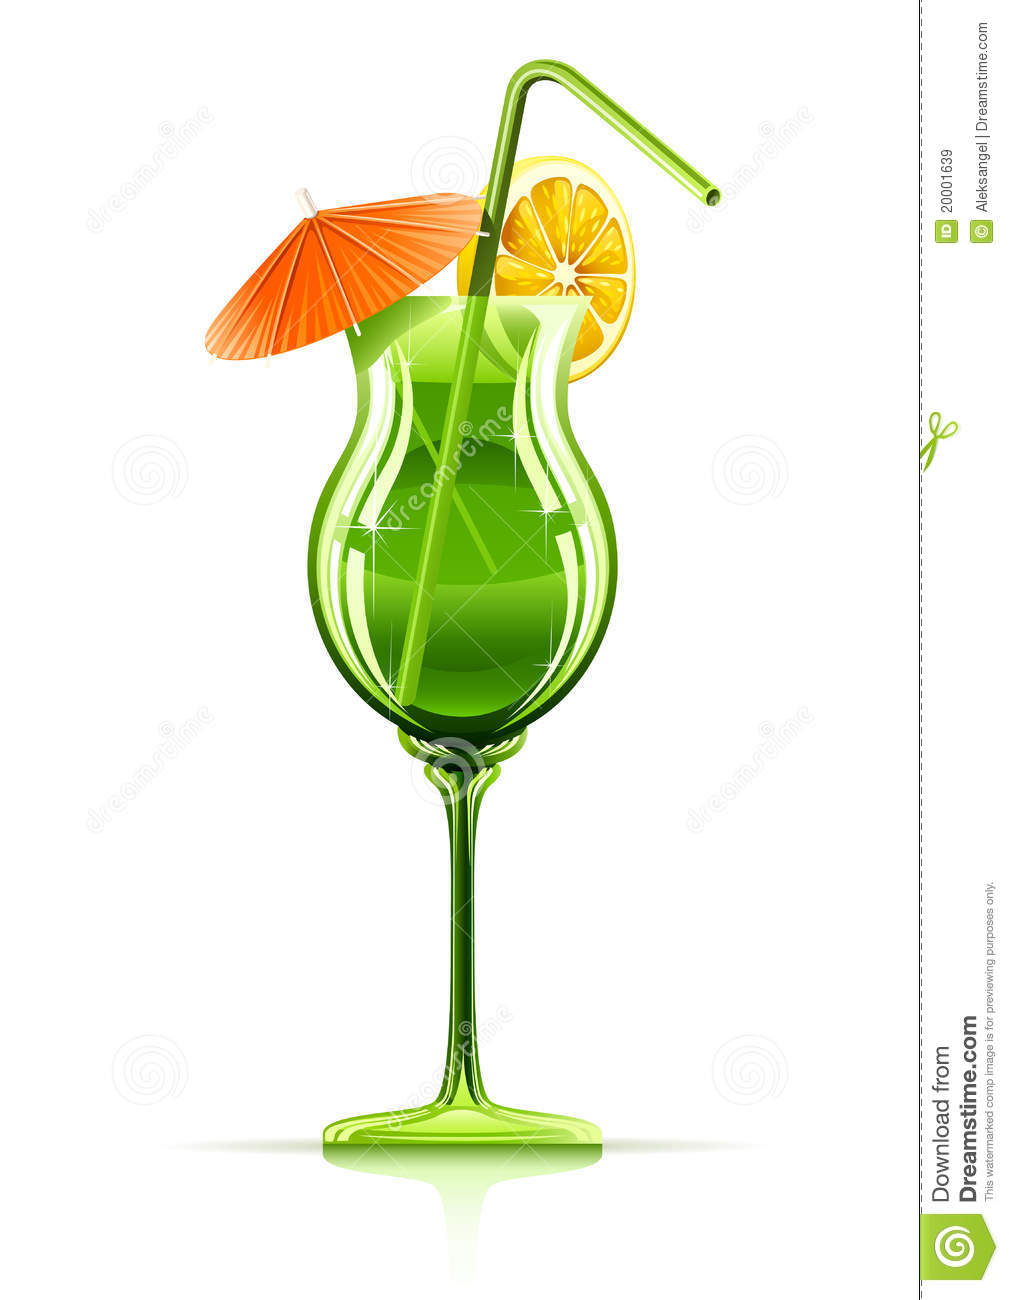 Tropical Cocktail In Glass Royalty Free Stock Images   Image  20001639